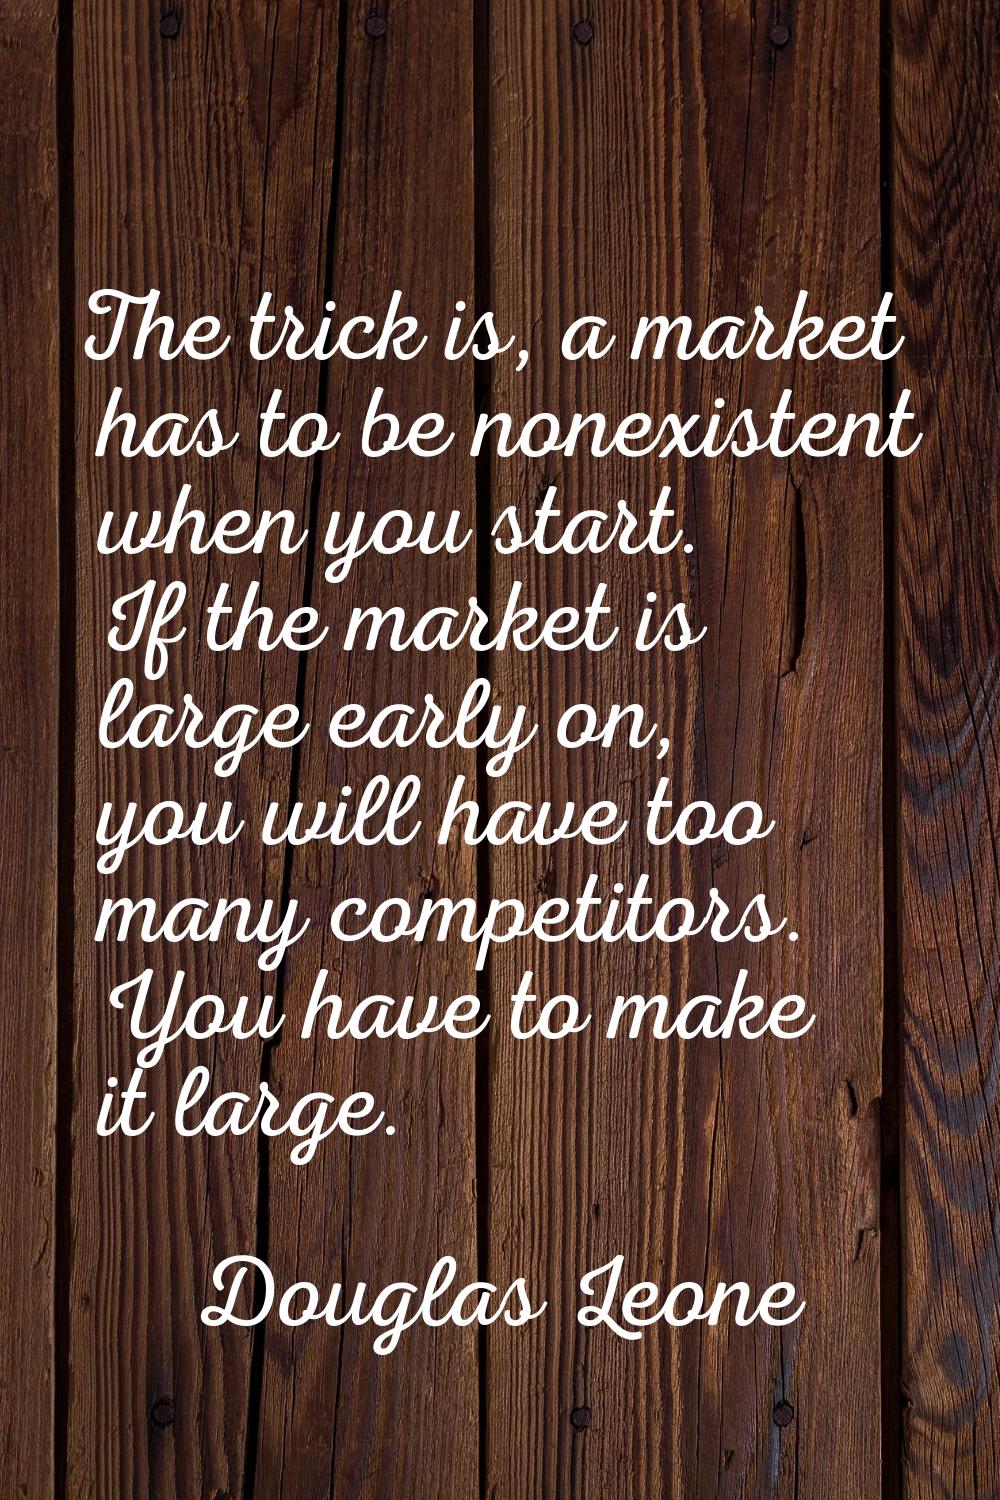 The trick is, a market has to be nonexistent when you start. If the market is large early on, you w